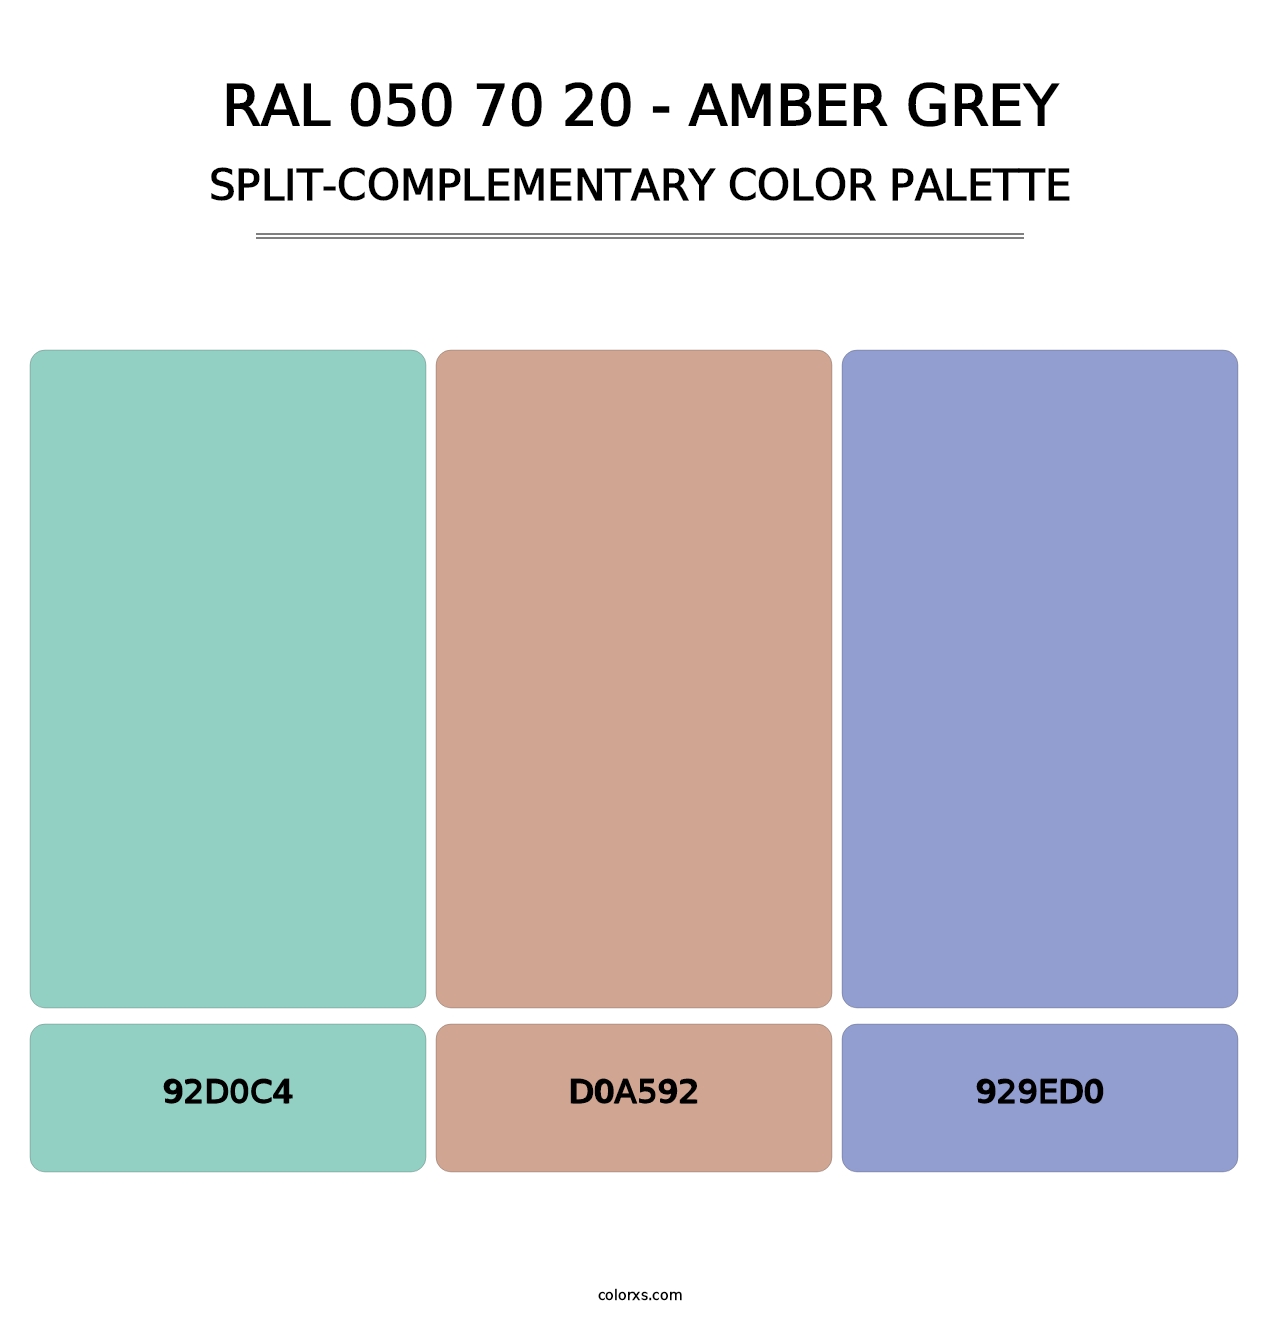 RAL 050 70 20 - Amber Grey - Split-Complementary Color Palette